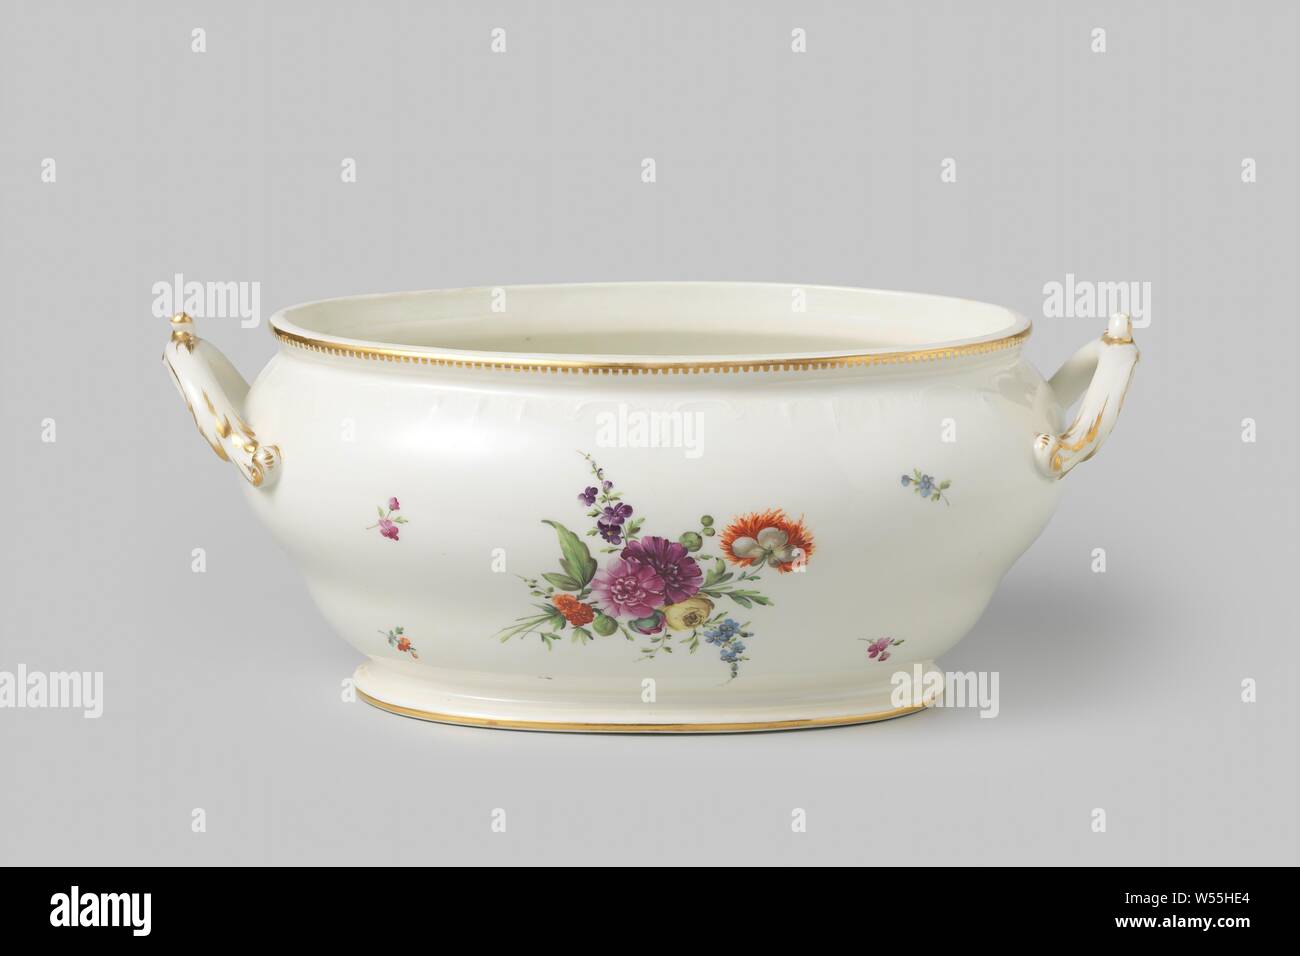 Porcelain soup tureen, porcelain soup tureen. Painted with bouquets and scattered flowers. The walls are covered with rocaill motifs in gold. The ears of rocaille leaf shapes are placed in the longitudinal axis., Manufactuur Oud-Loosdrecht, Loosdrecht, c. 1774 - c. 1784, porcelain (material), h 14.5 cm × w 38 cm × d 24 Stock Photo